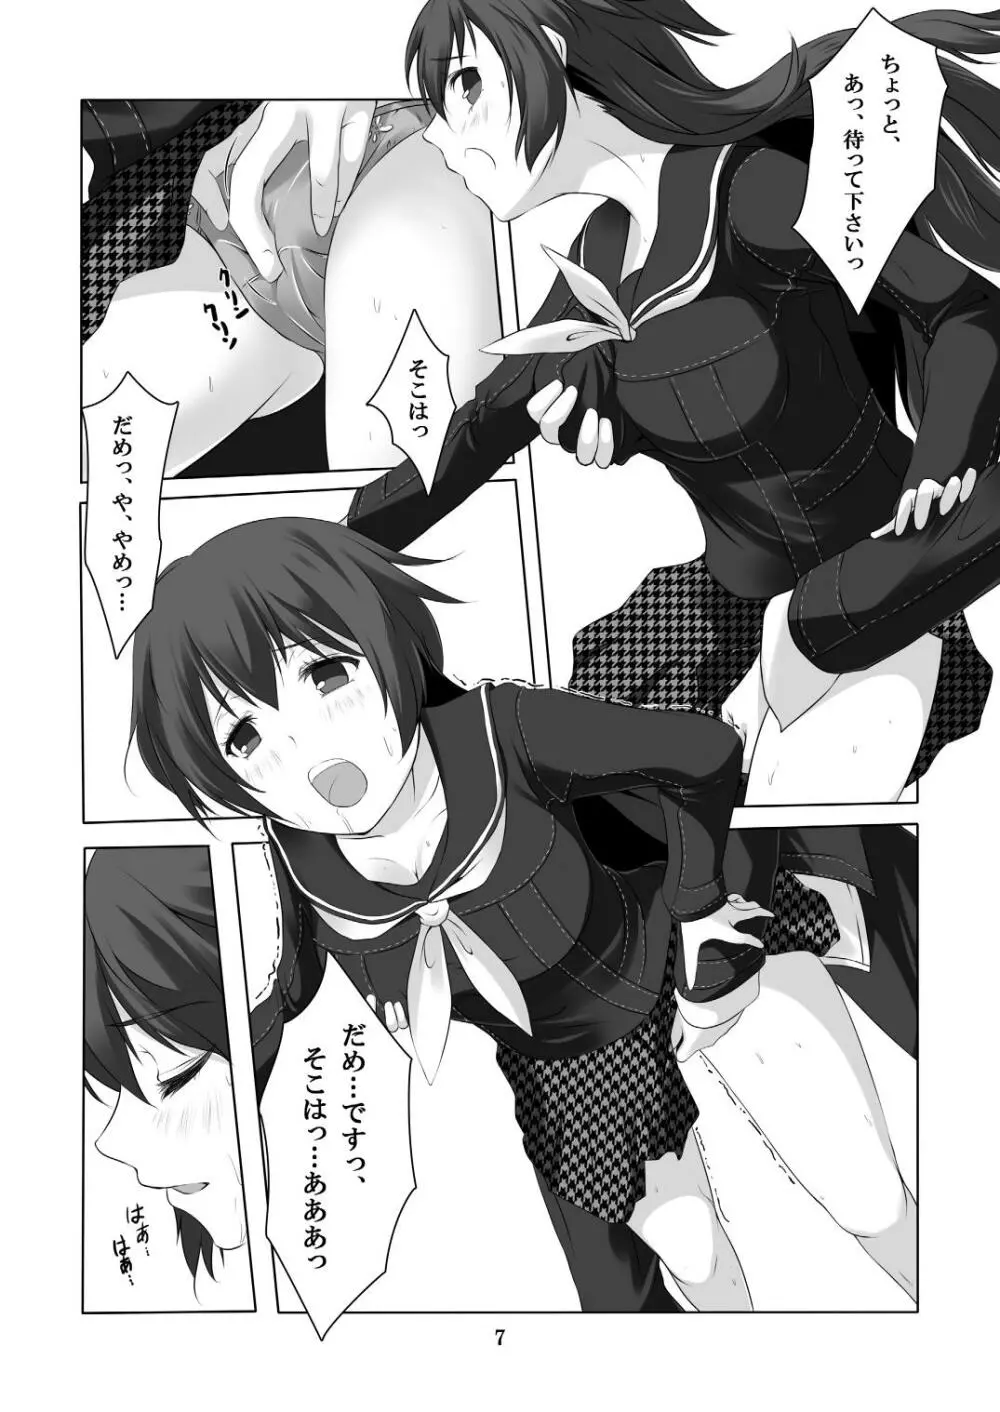 Persona 4: The Doujin #3 #4 Page.8